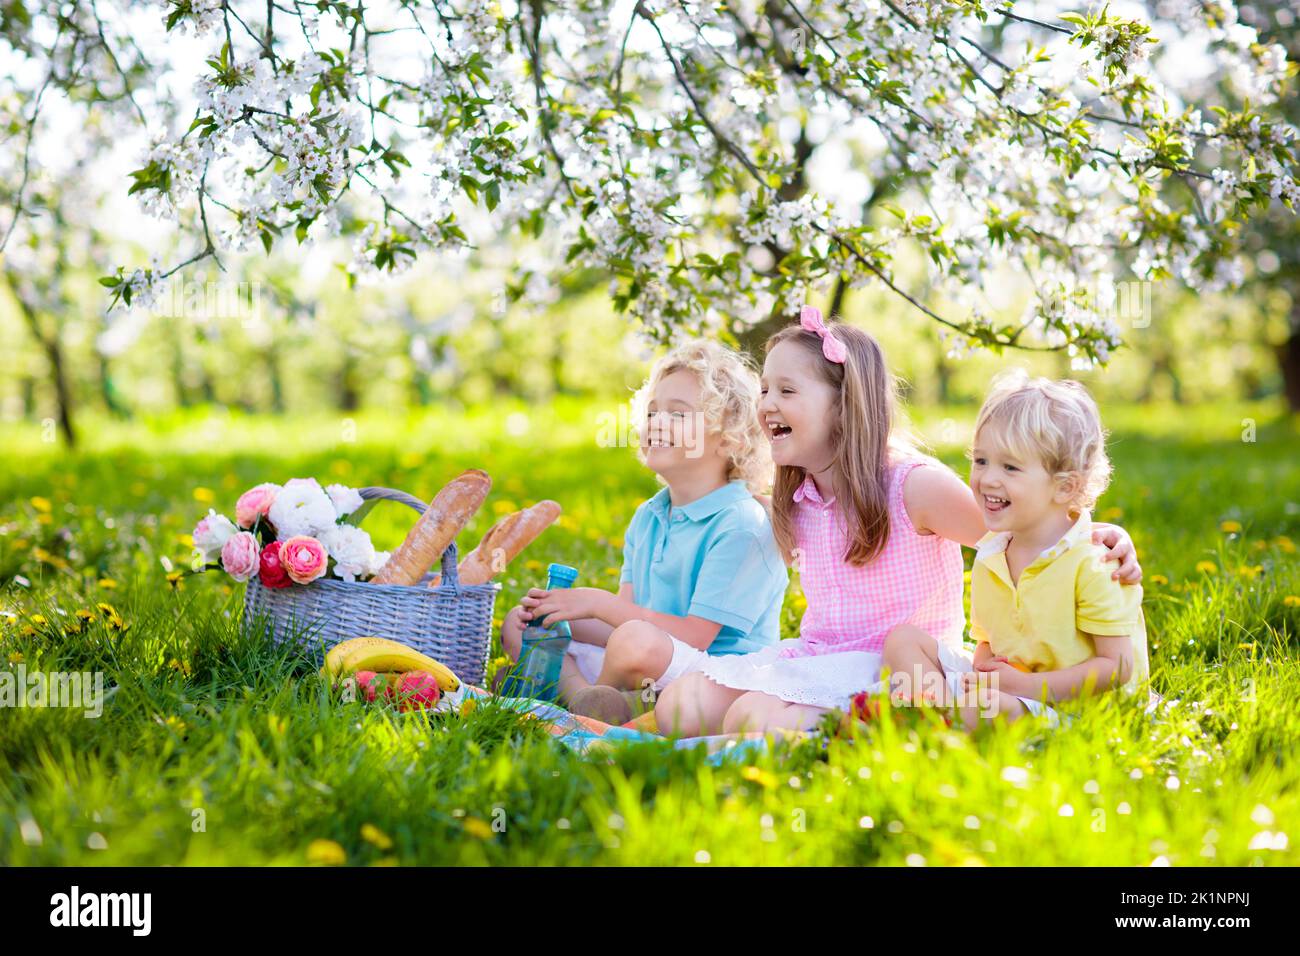 Family picnic in spring park with blooming cherry trees. Kids eating fruit and bread lunch outdoors in blooming apple garden sitting on a blanket with Stock Photo